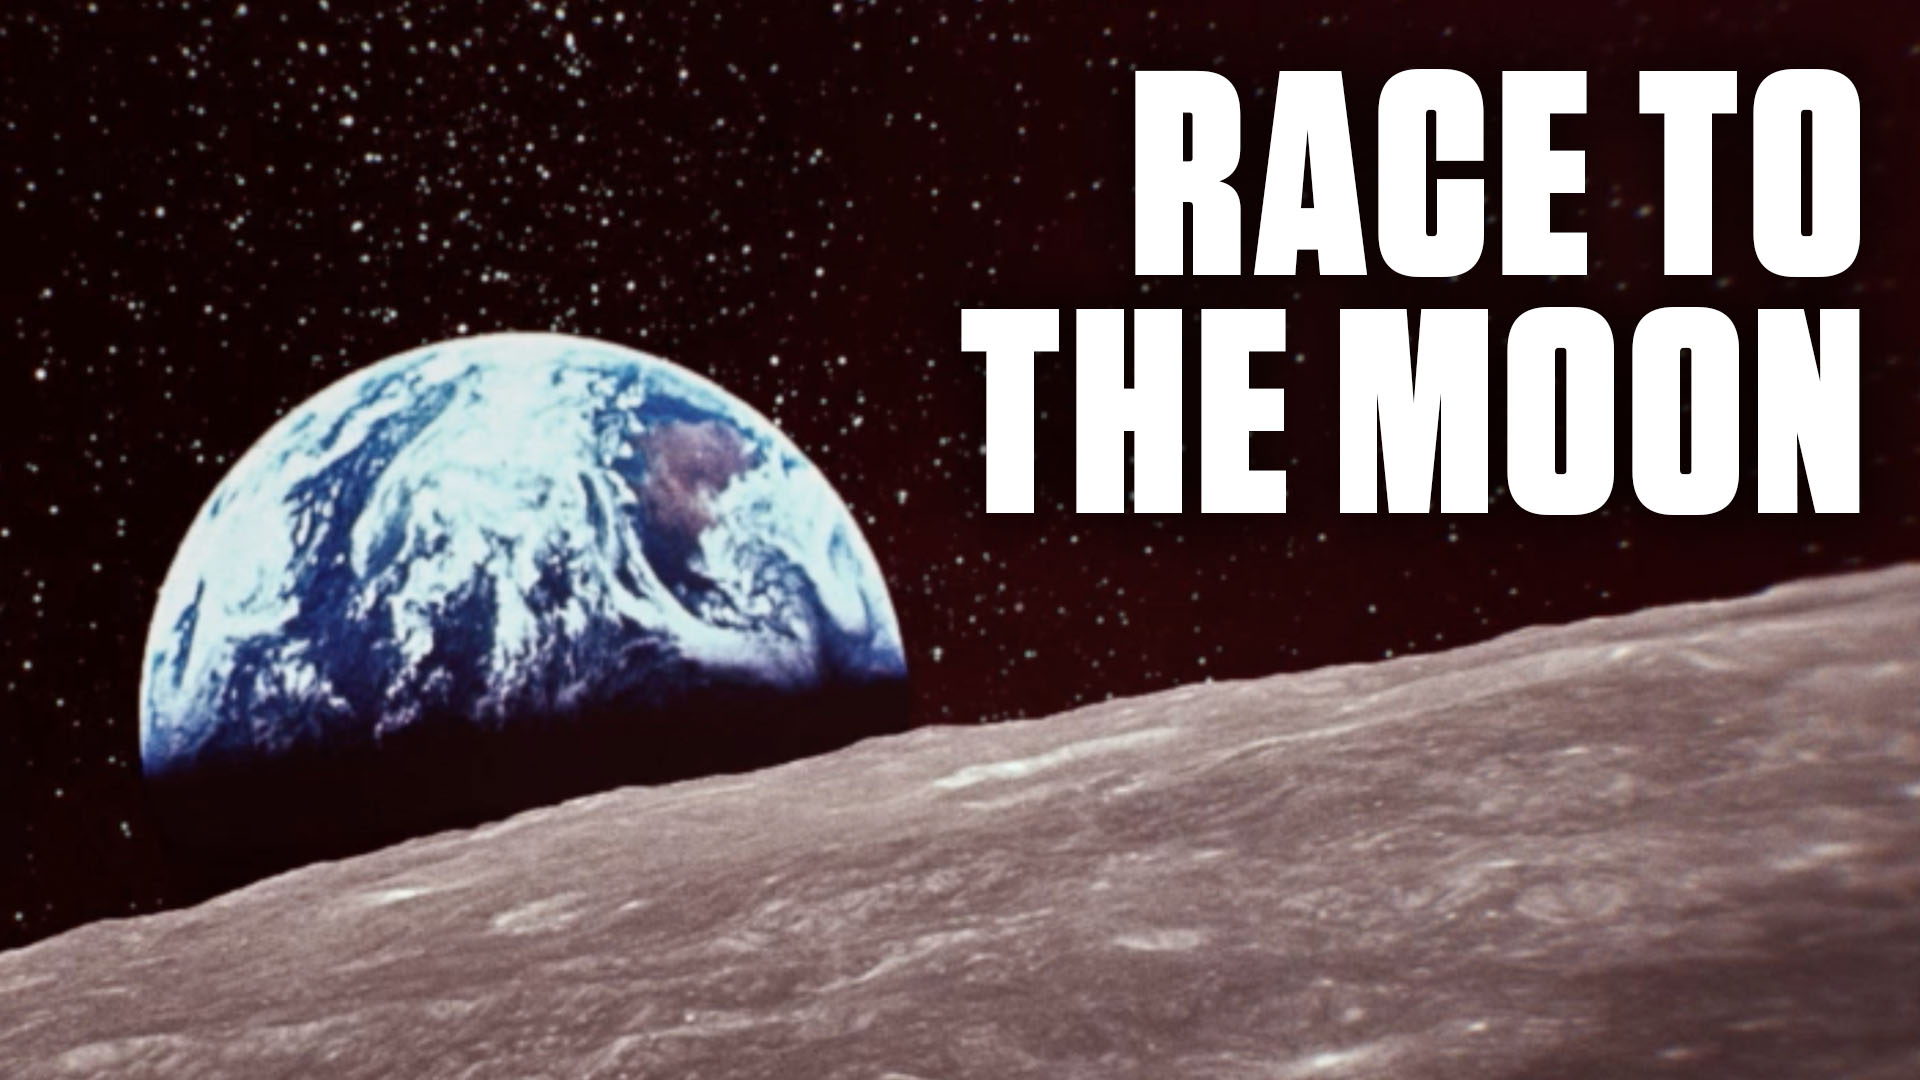 Races the moon. Go to the Moon. Race to the Moon. What if Russians on the Moon! Documentary. We never went to the Moon.